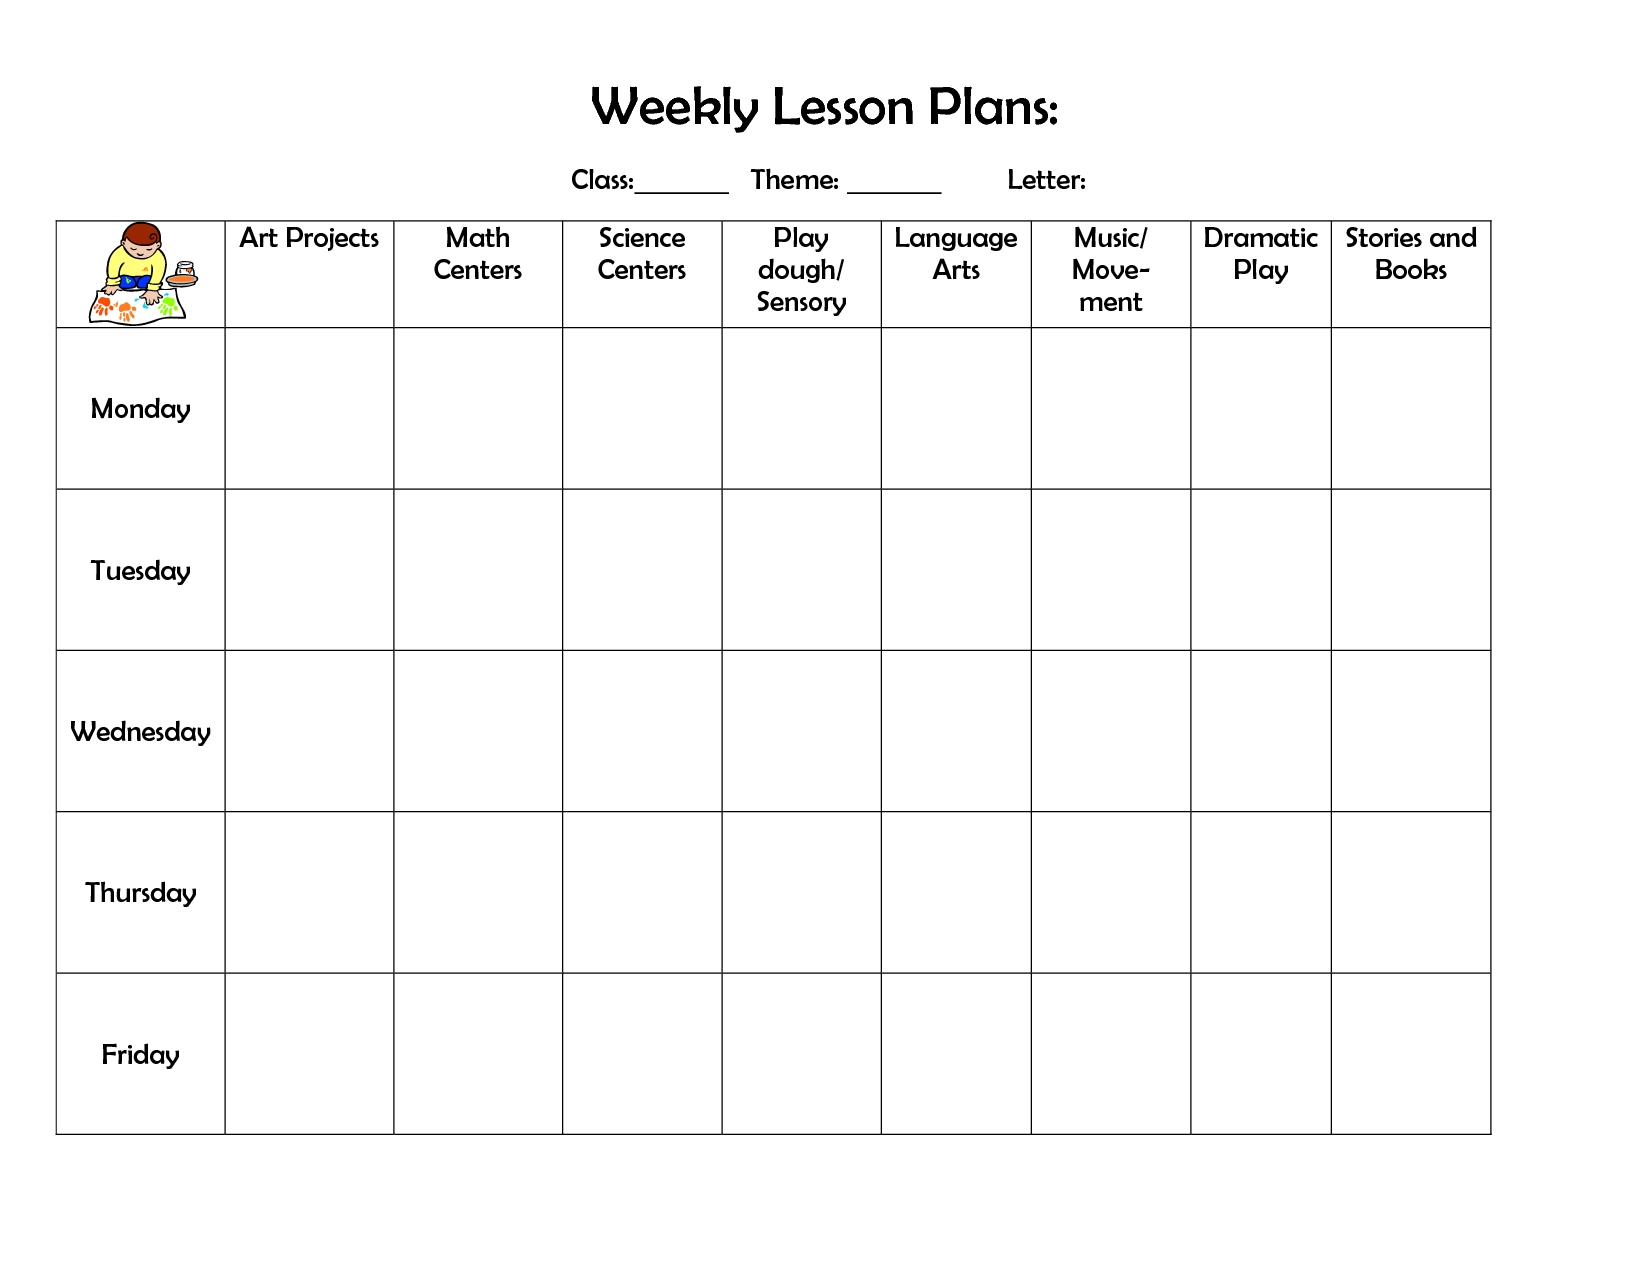 Weekly Lesson Plan | Lesson Plan Template | Preschool Lesson-Weekly Lesson Plan Blank Template